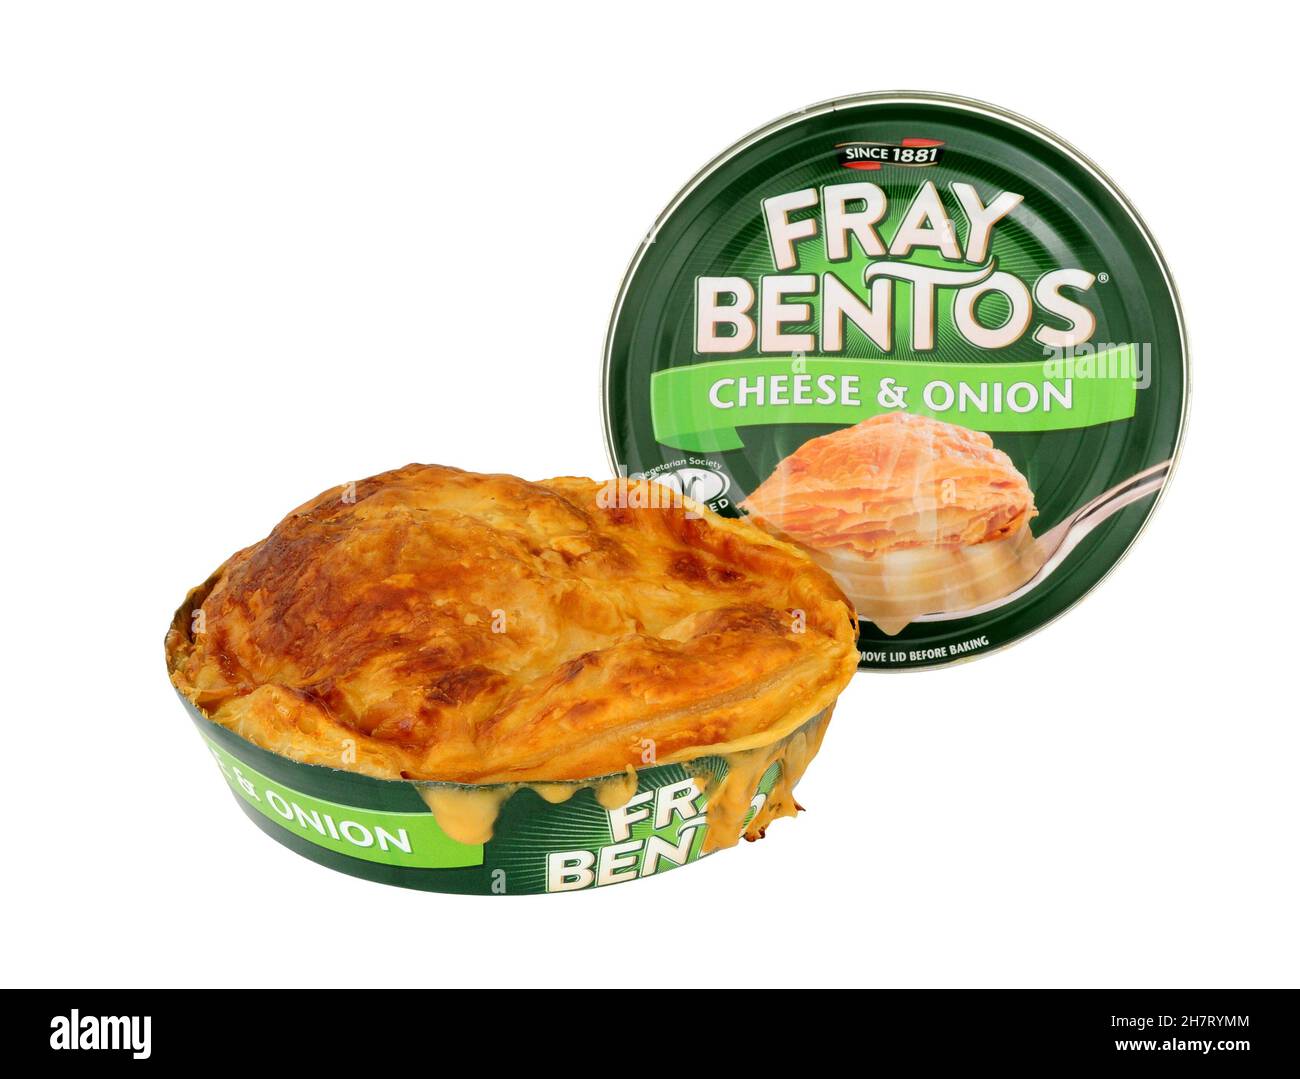 https://c8.alamy.com/comp/2H7RYMM/fray-bentos-cooked-tinned-cheese-and-onion-pie-with-puff-pastry-2H7RYMM.jpg